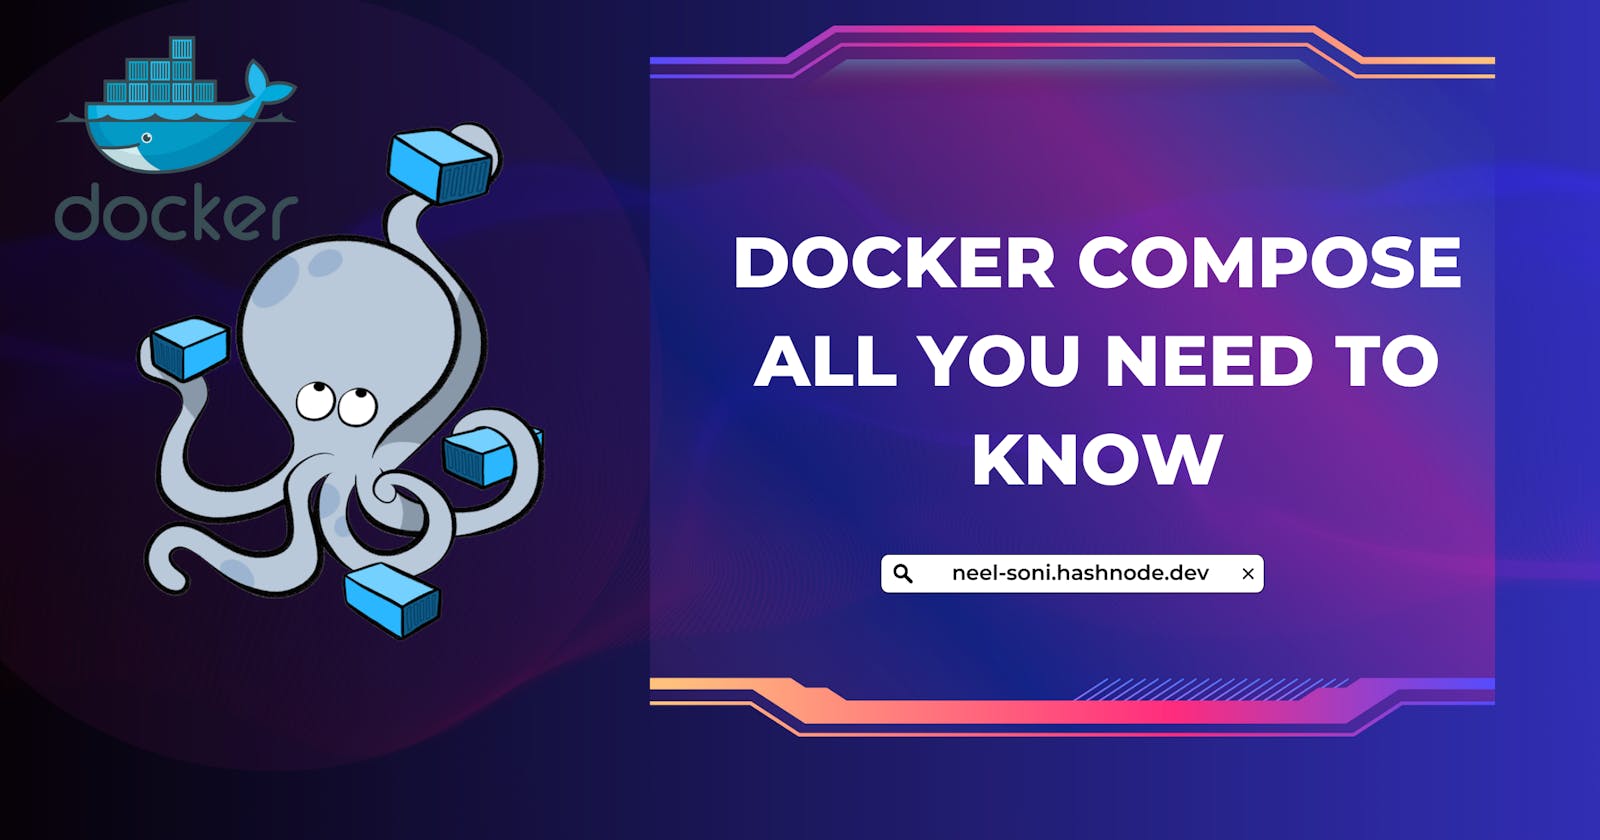 All you need to know about Docker Compose